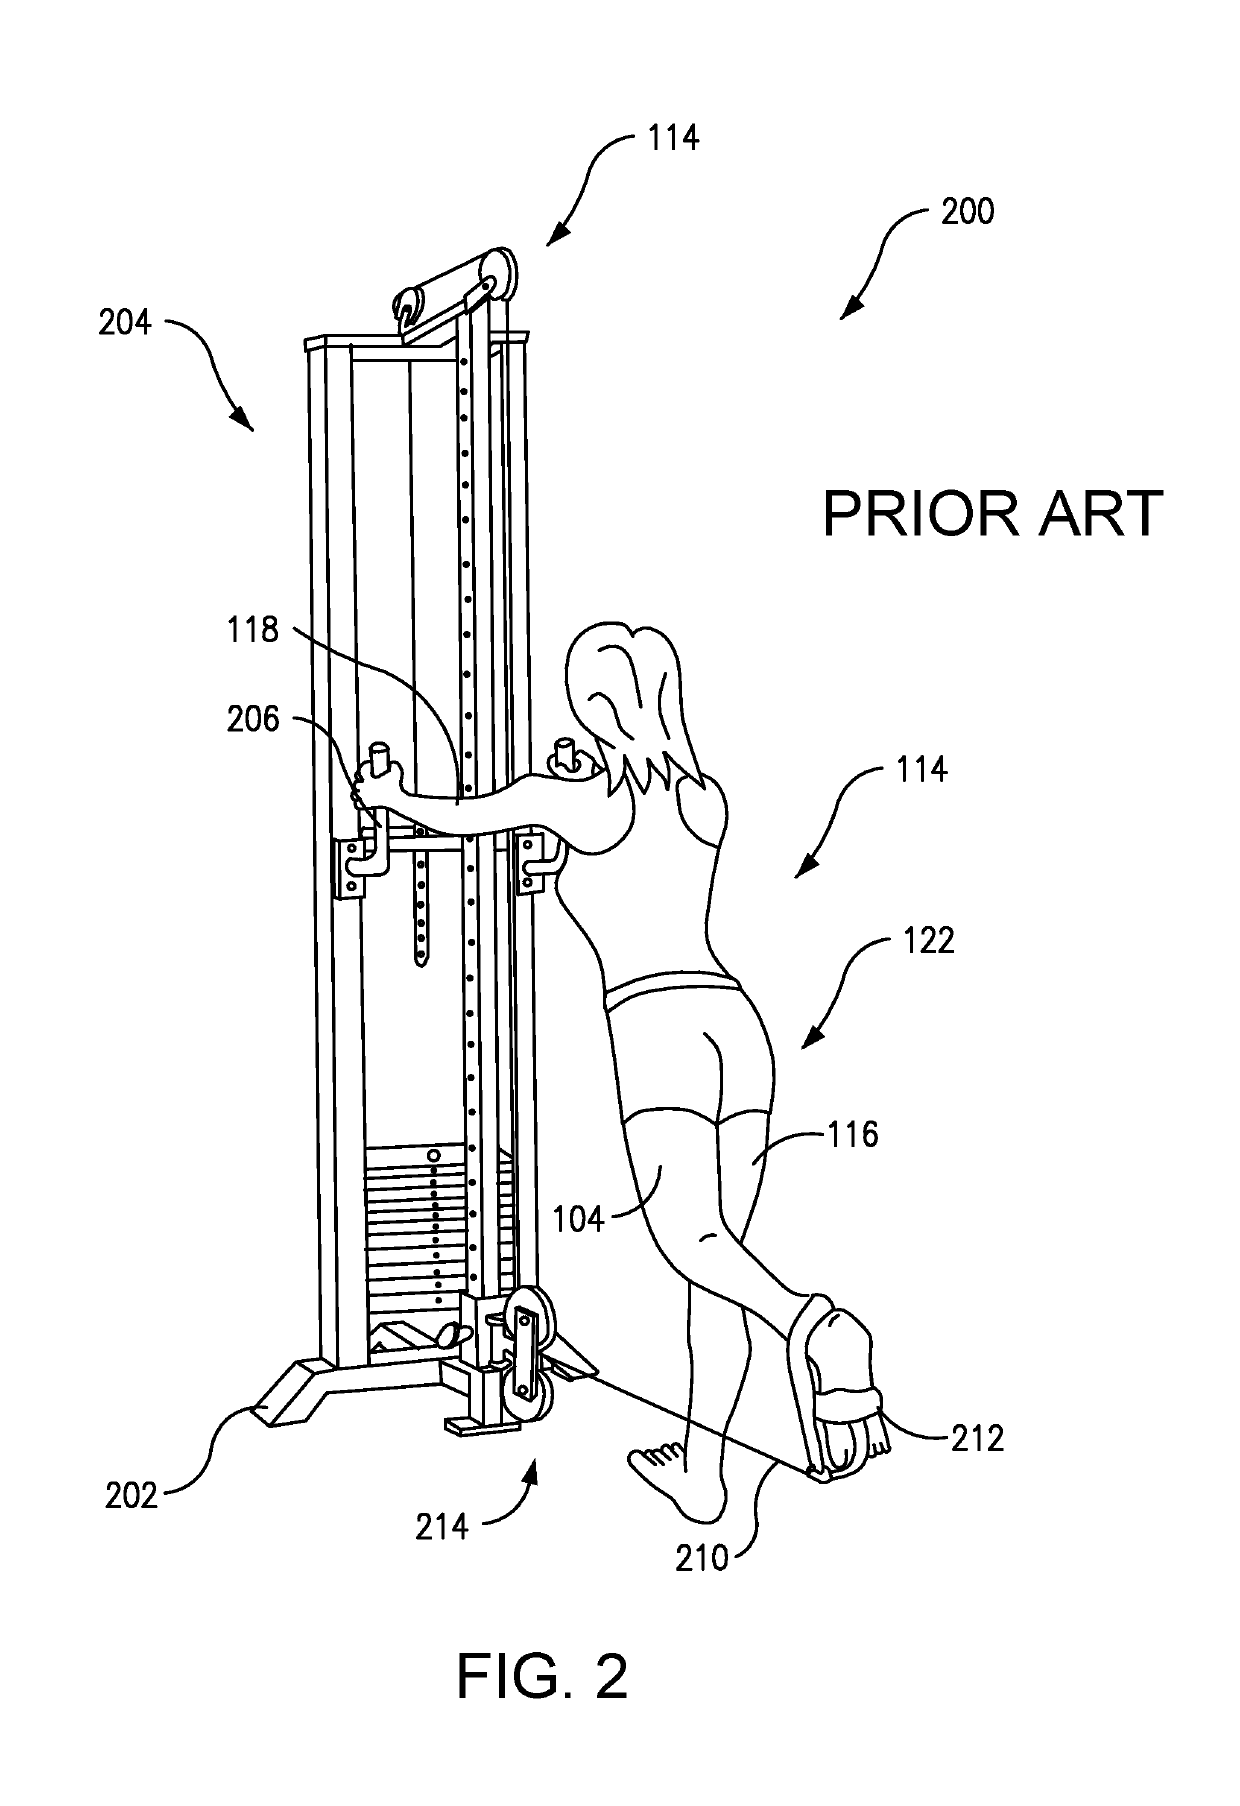 Lower body fitness apparatus for providing enhanced muscle engagement, body stability and range of motion